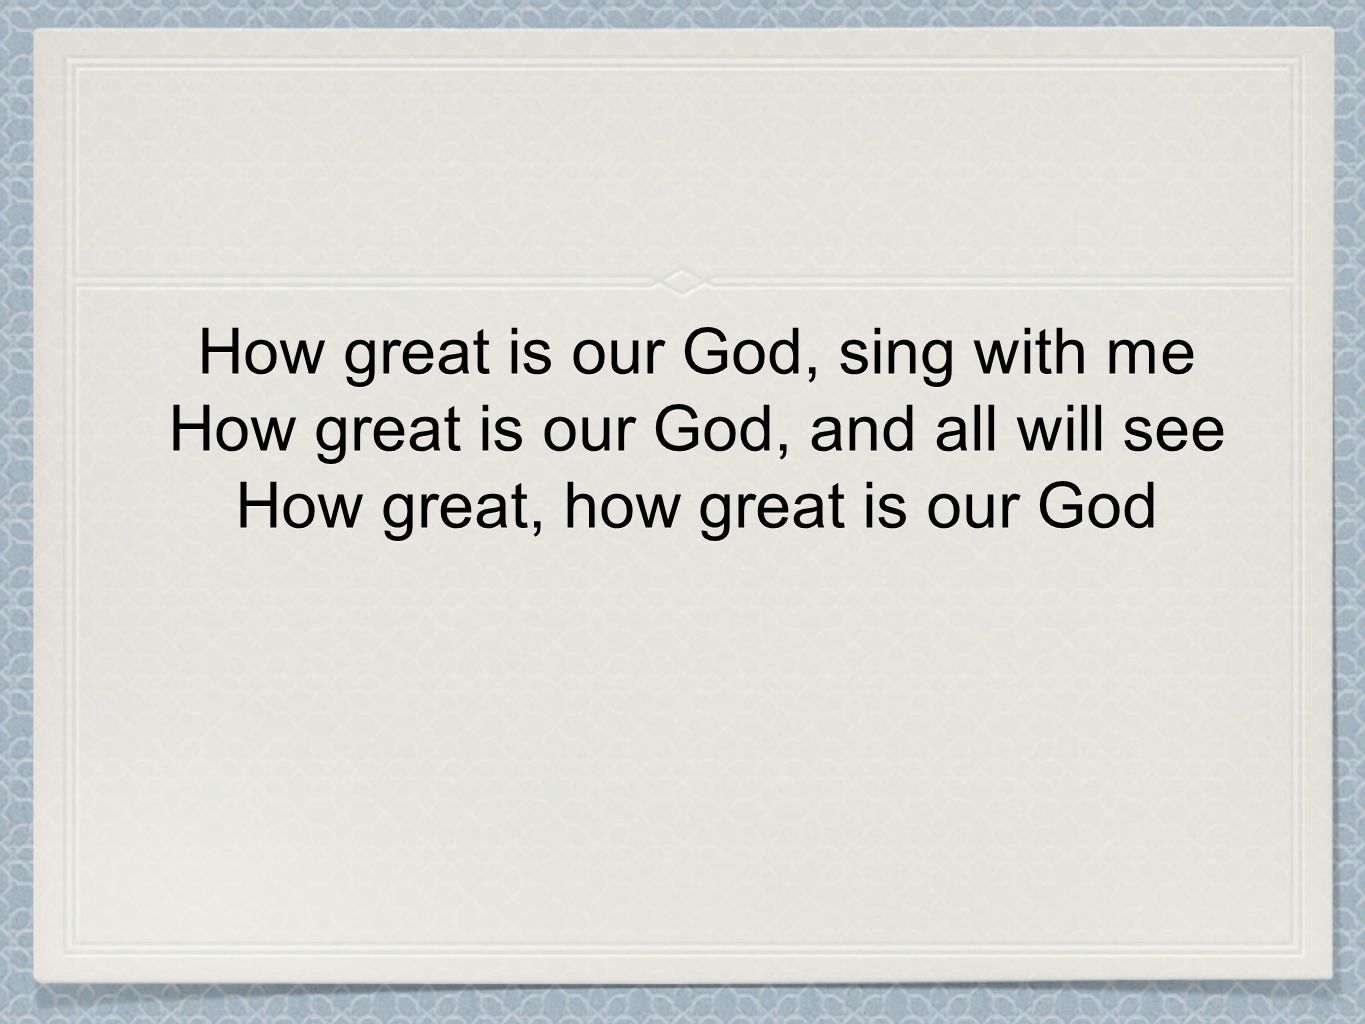 How great is our God, sing with me How great is our God, and all will see How great, how great is our God